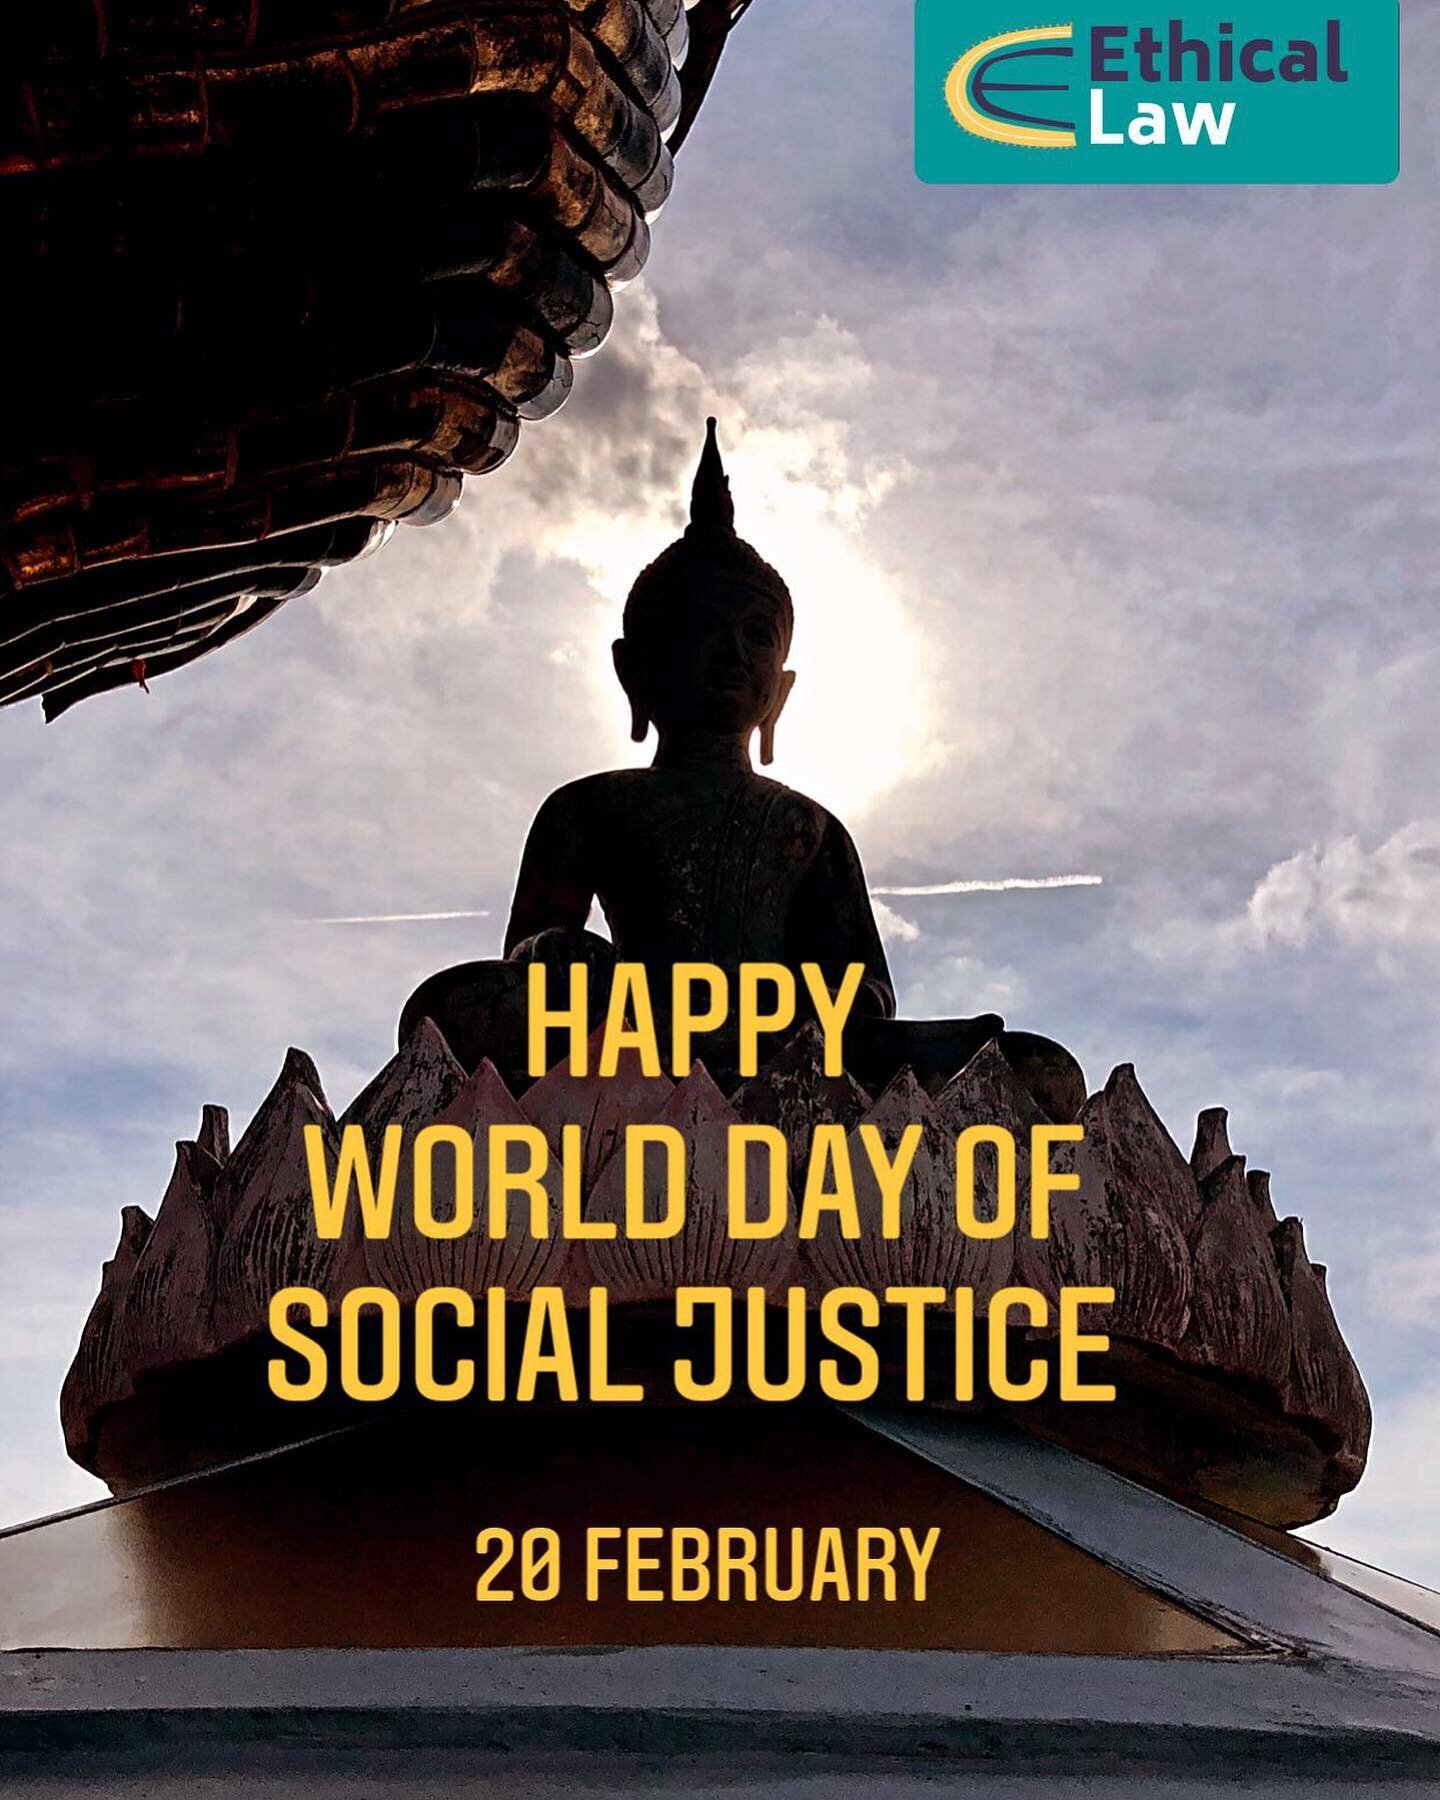 The 2021 theme for #worlddayofsocialjustice worlddayofsocialjustice is &ldquo;A Call for Social Justice in the Digital Economy&rdquo;.

The growth of technology, including digital labour platforms, particularly since the start of the COVID-19 pandemi